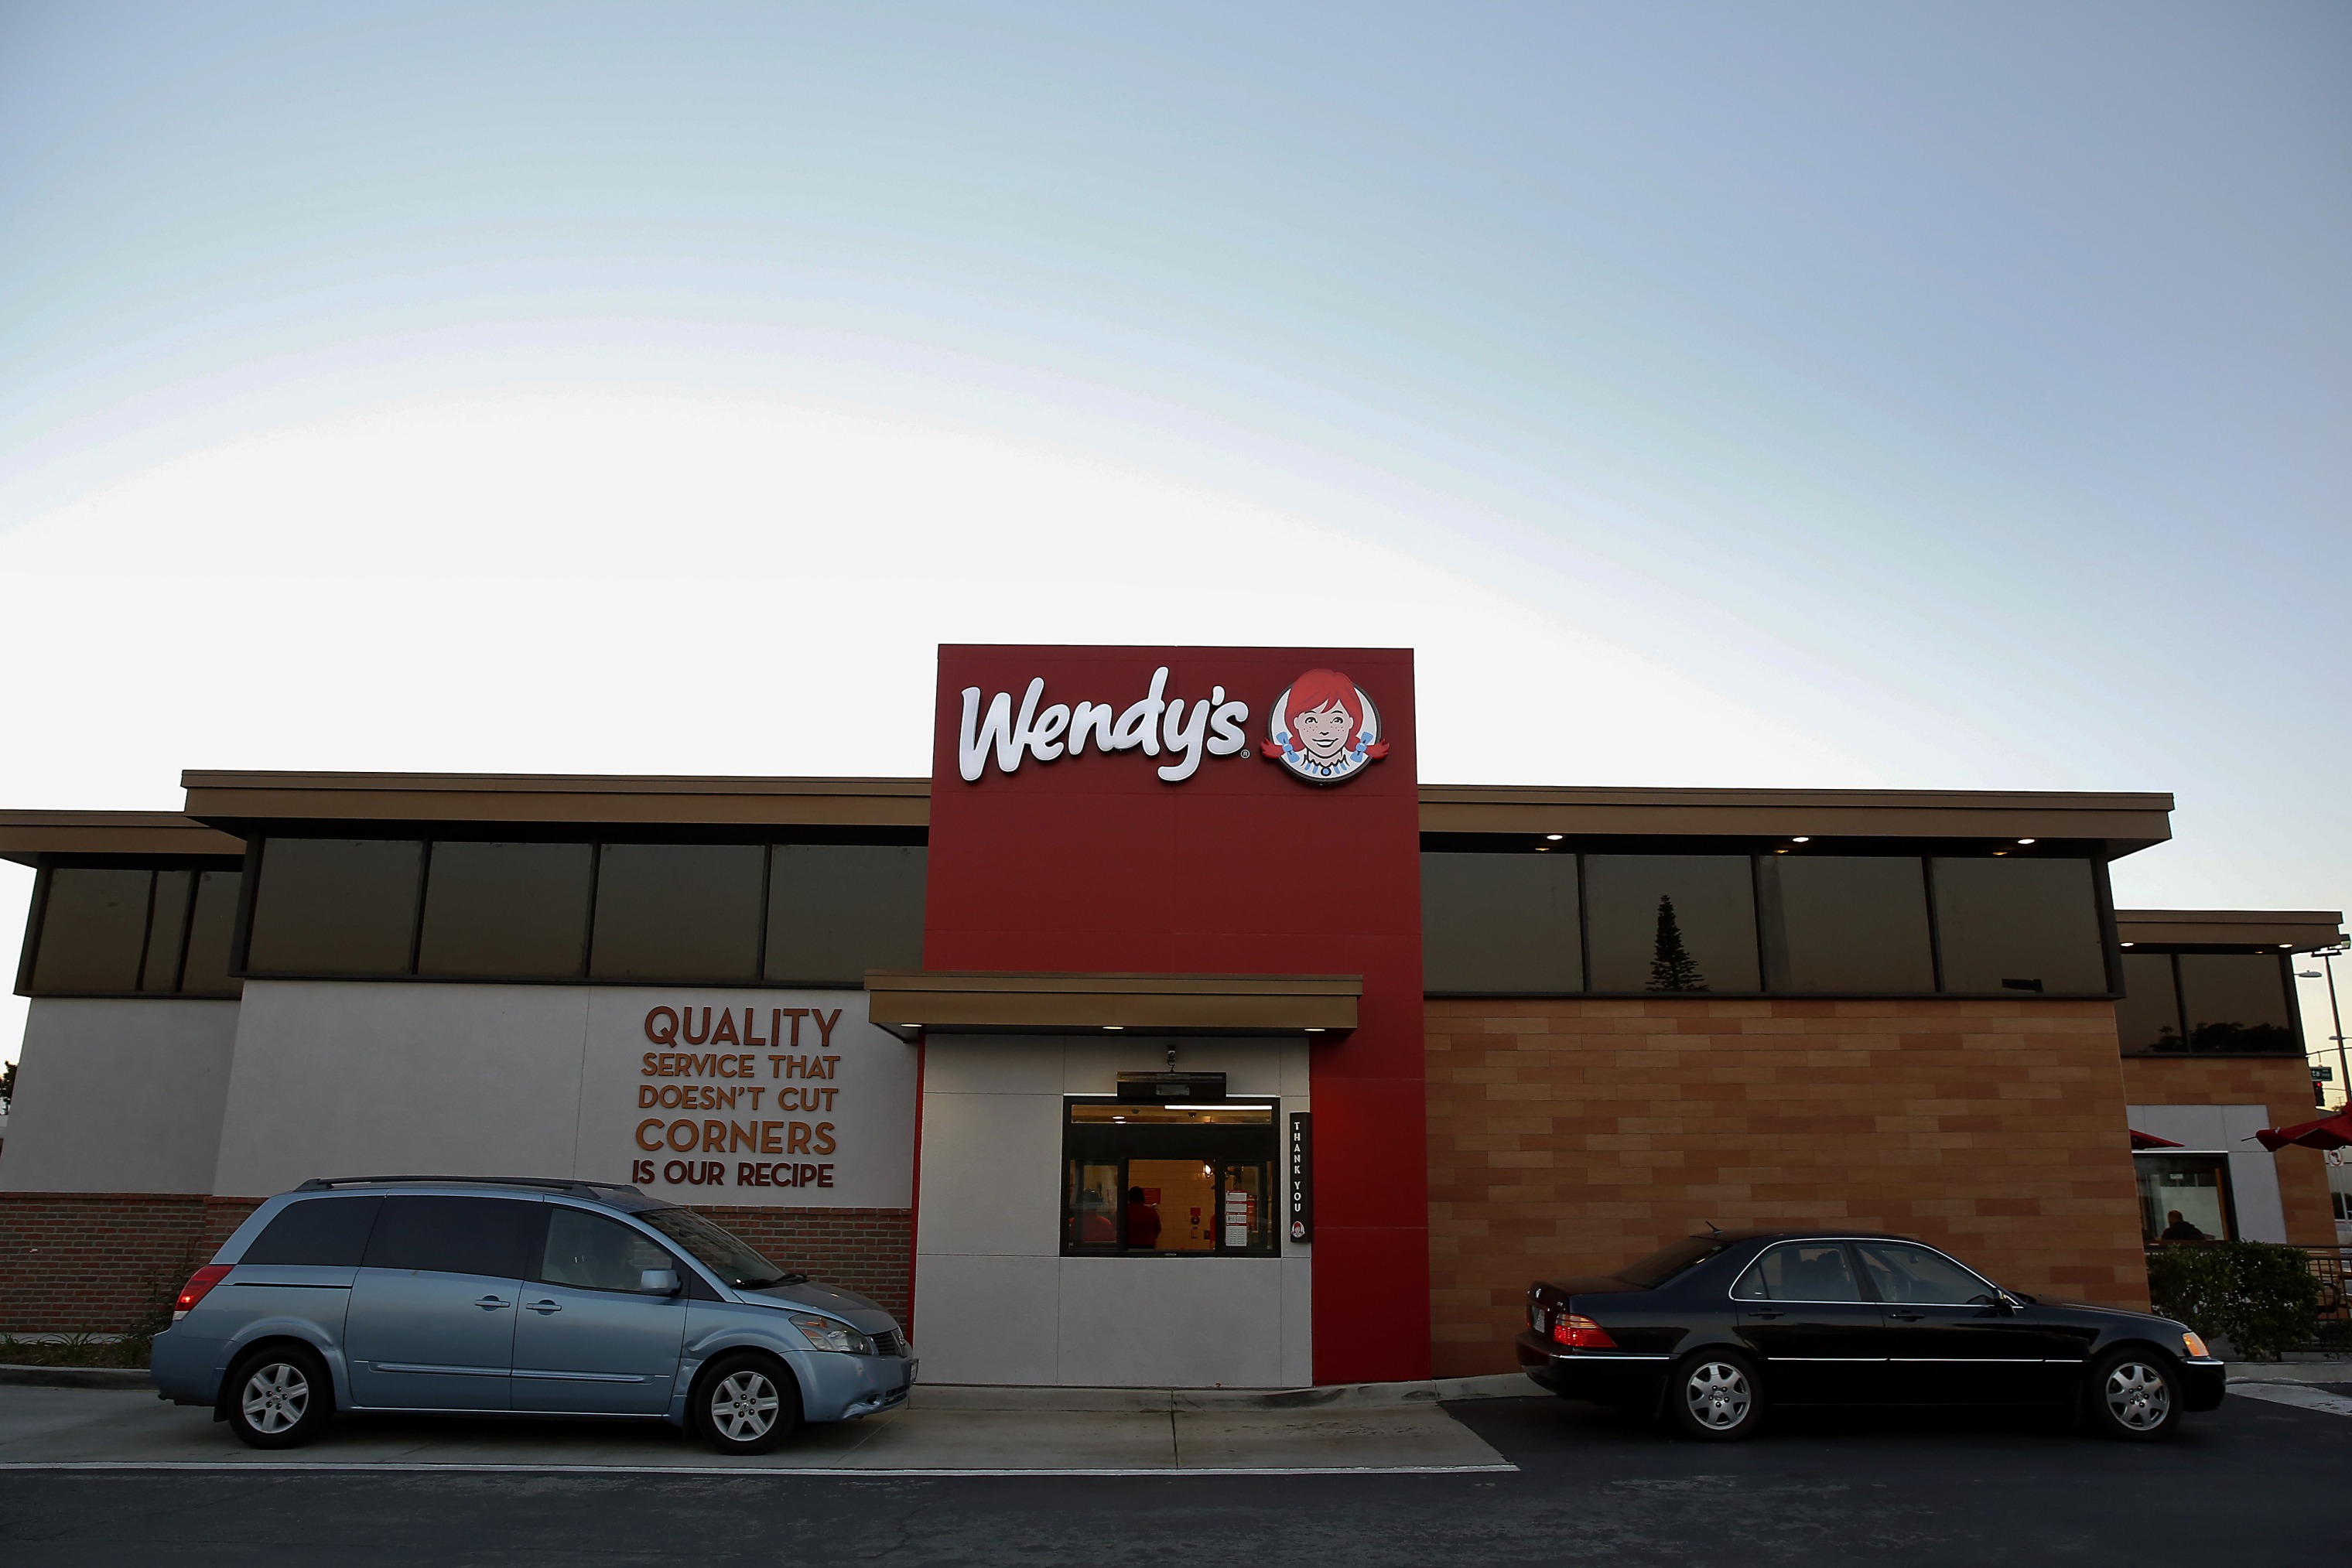 Wendy's is testing an AI-powered chatbot to take restaurant orders